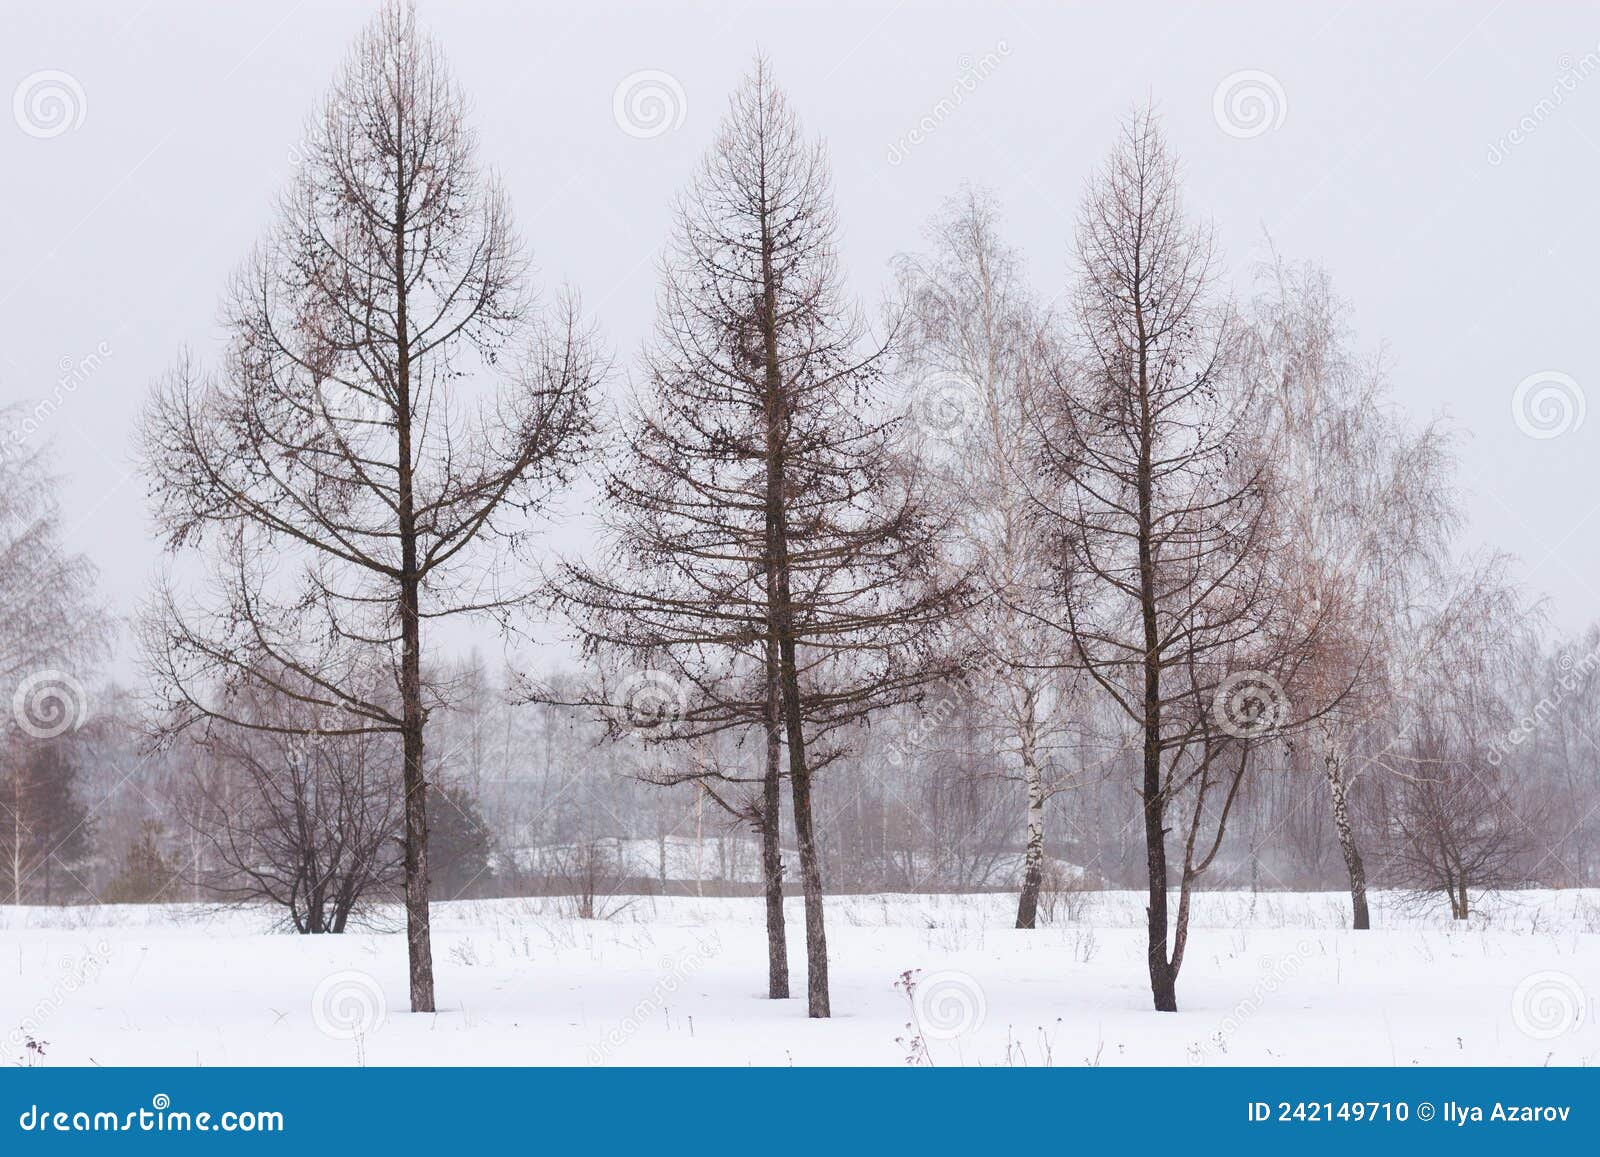 three leafless trees during a misty snowy winter. dark sillouettes of trees